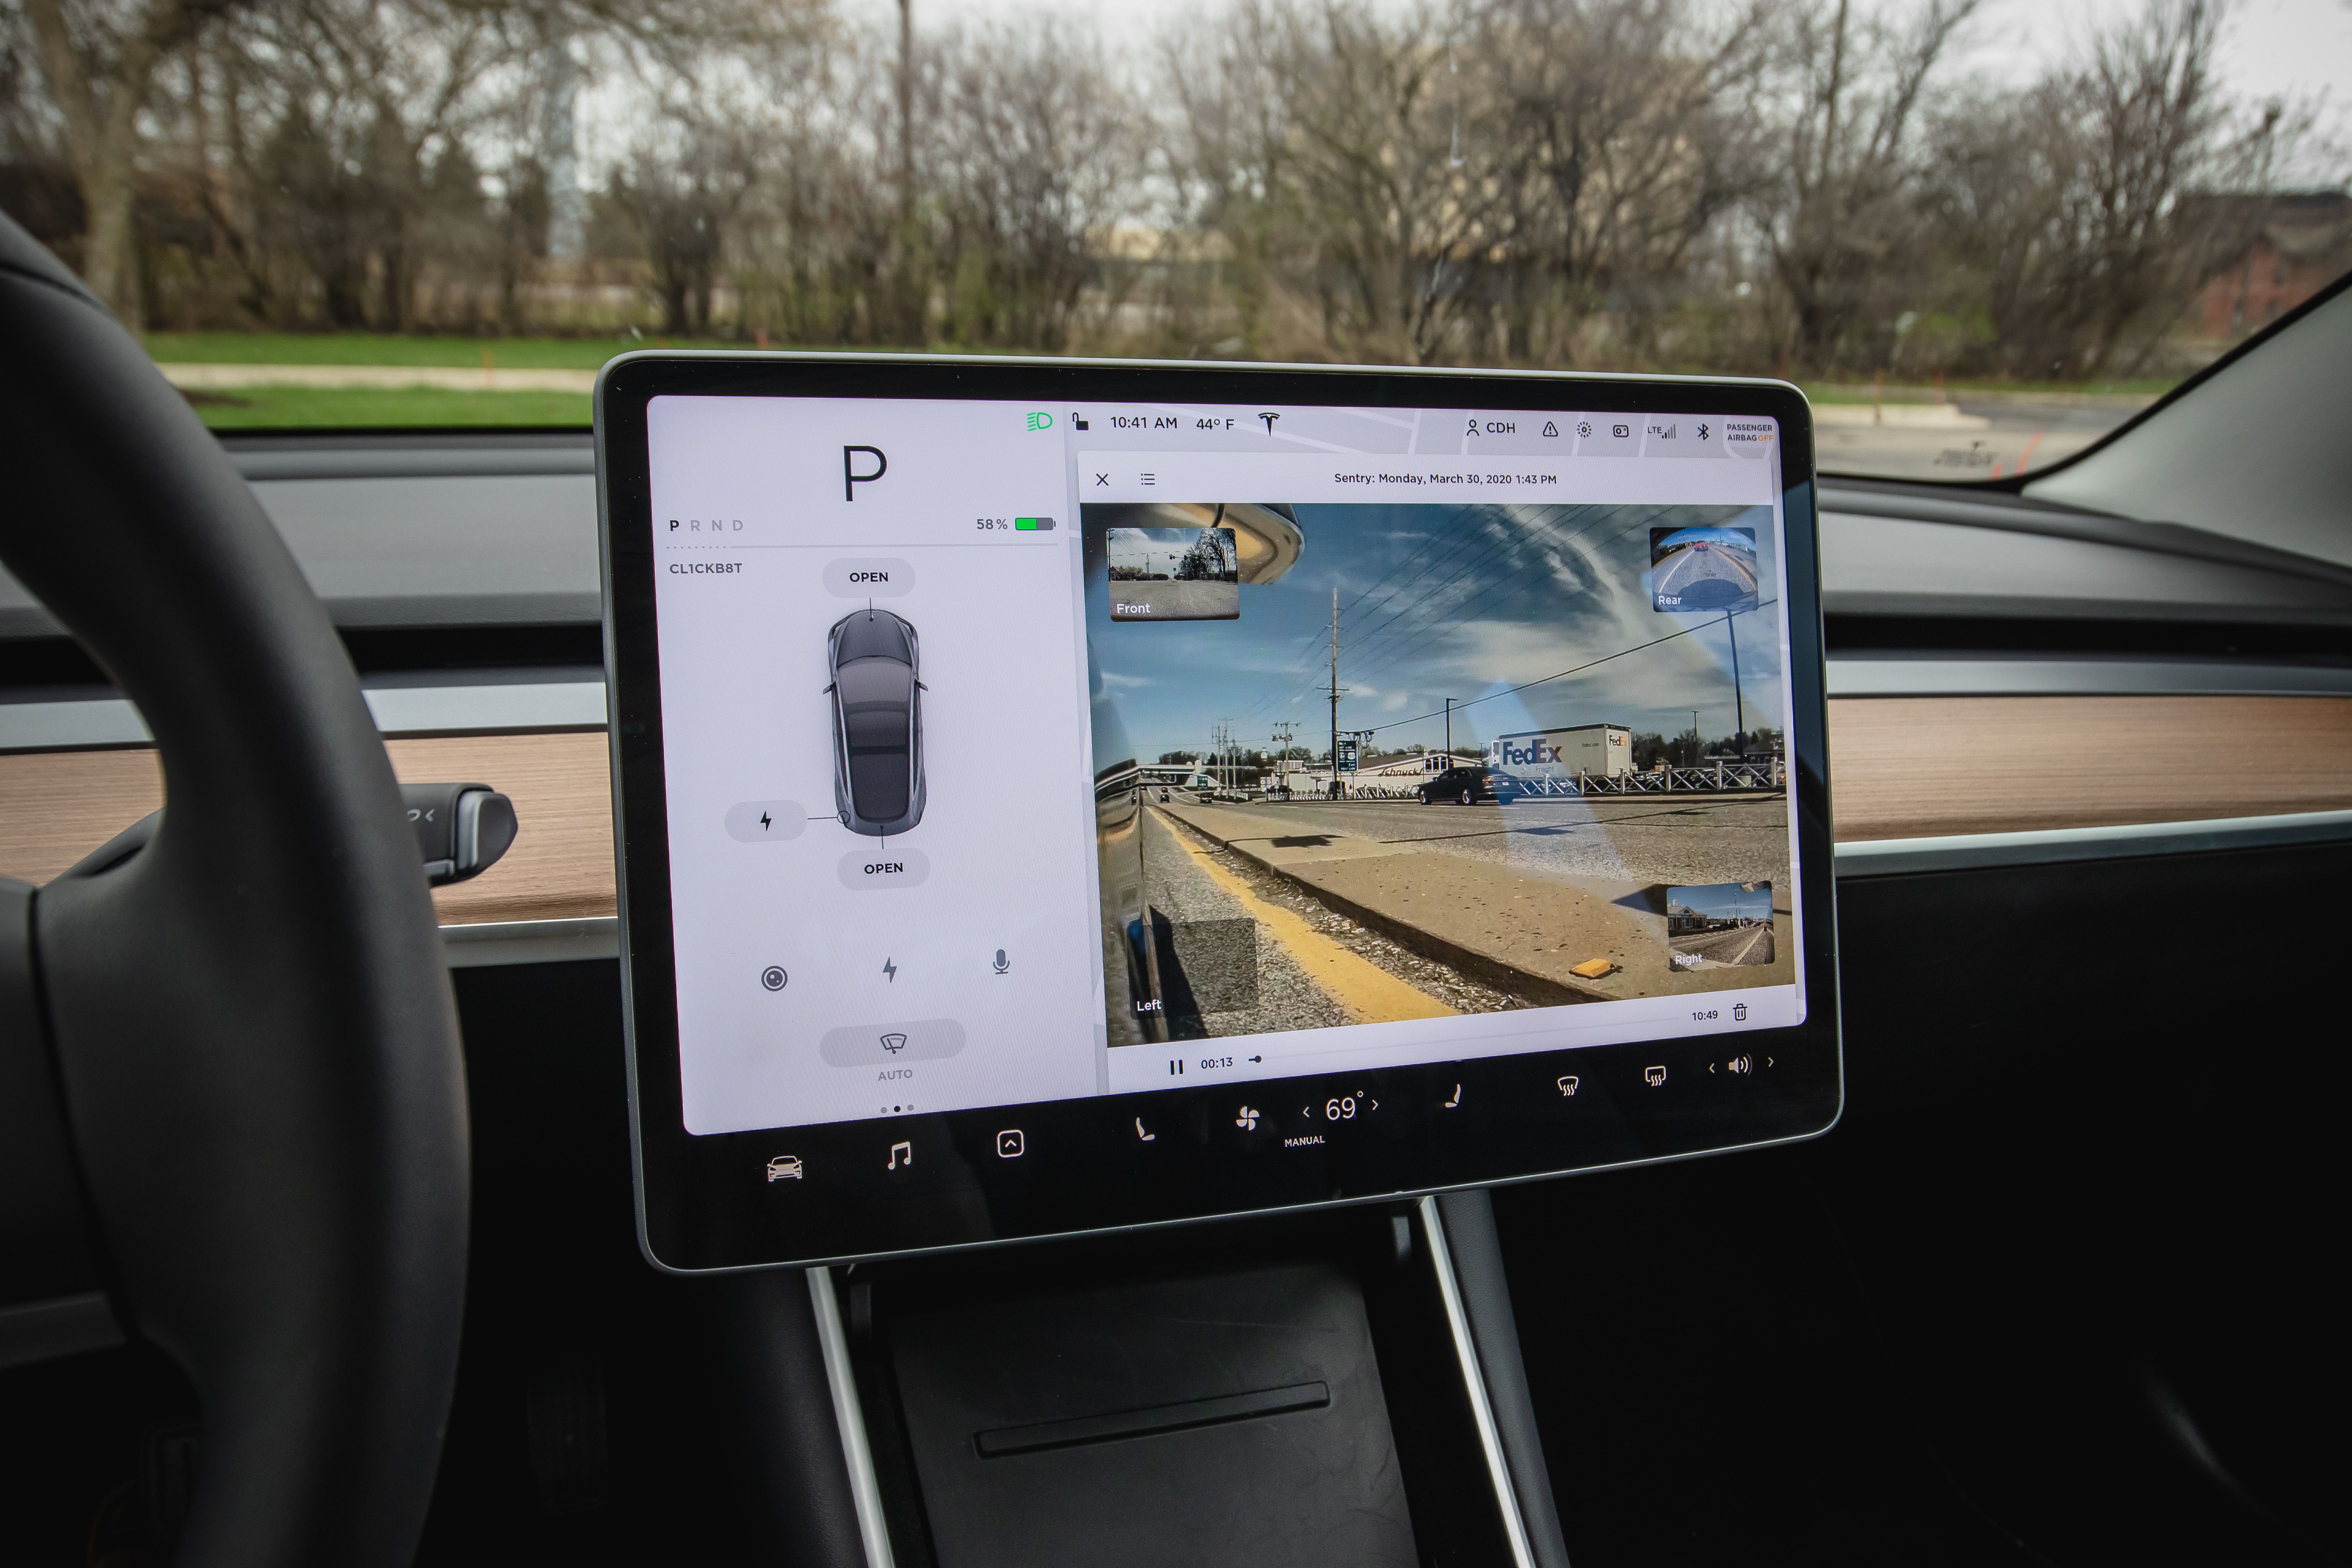 You Can Tesla Model Past Dashcam Footage on Its Screen